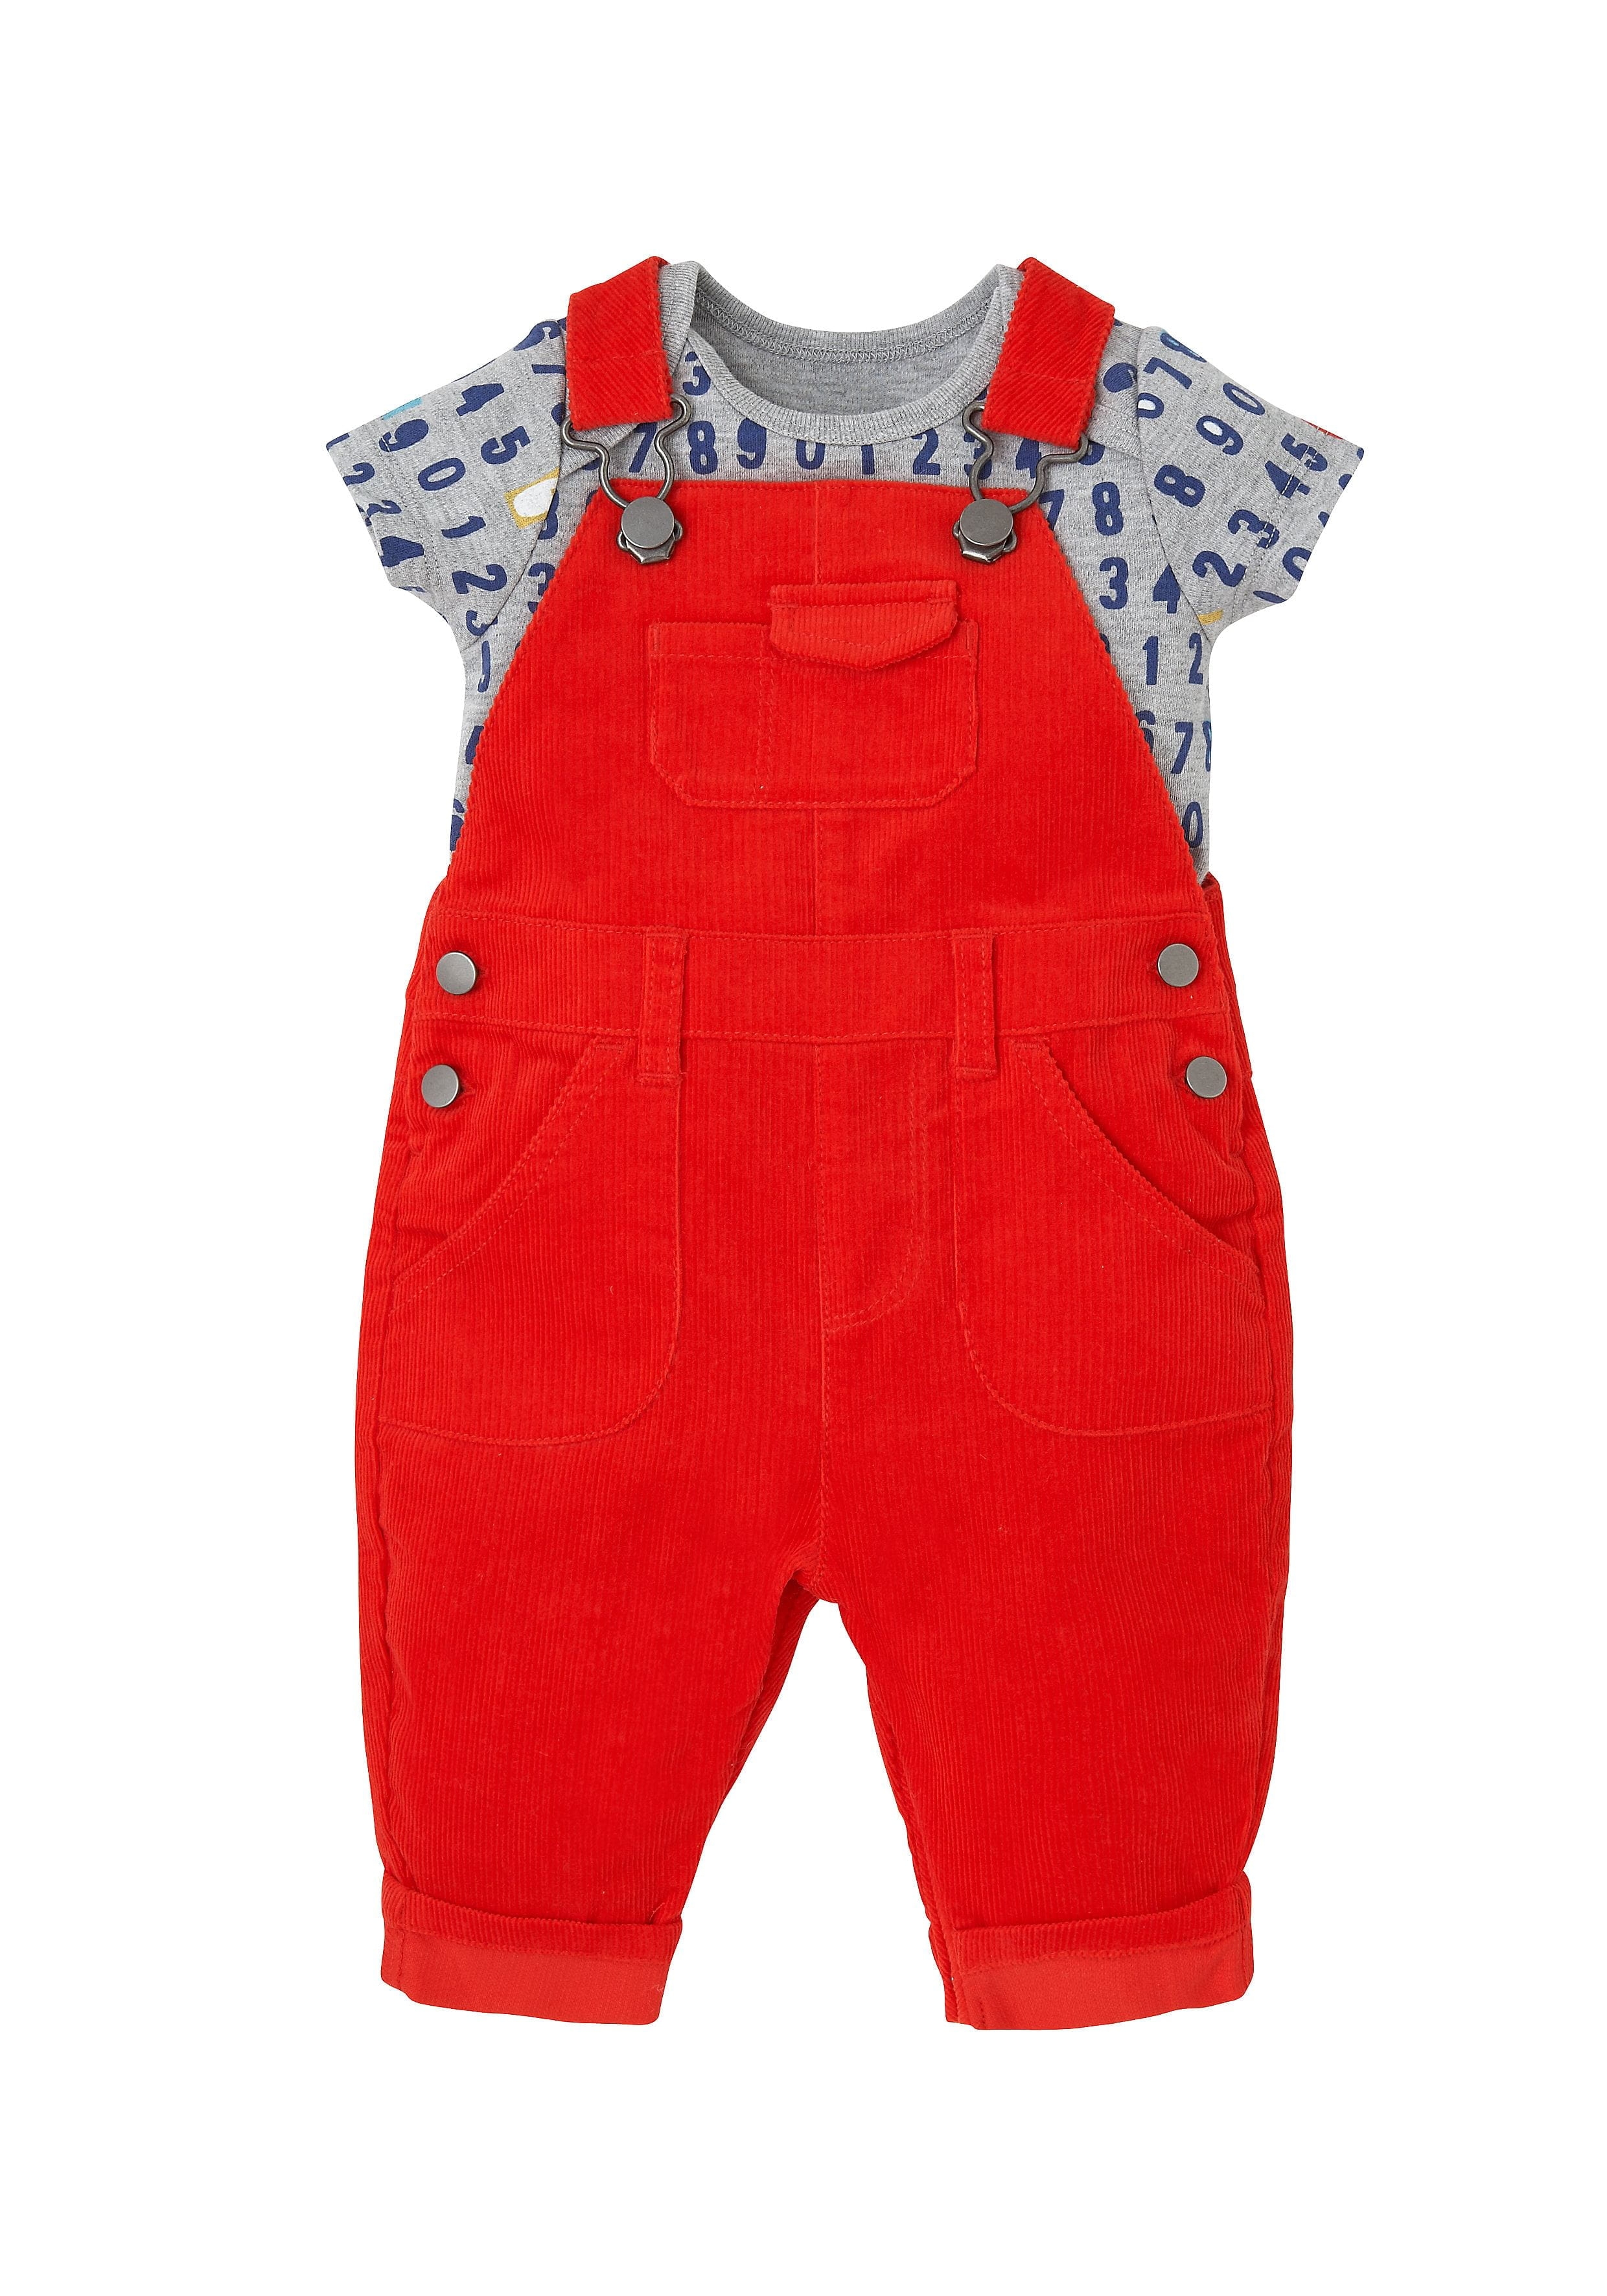 Mothercare | Boys Half Sleeves Cord Dungaree Set Number Print - Red 0